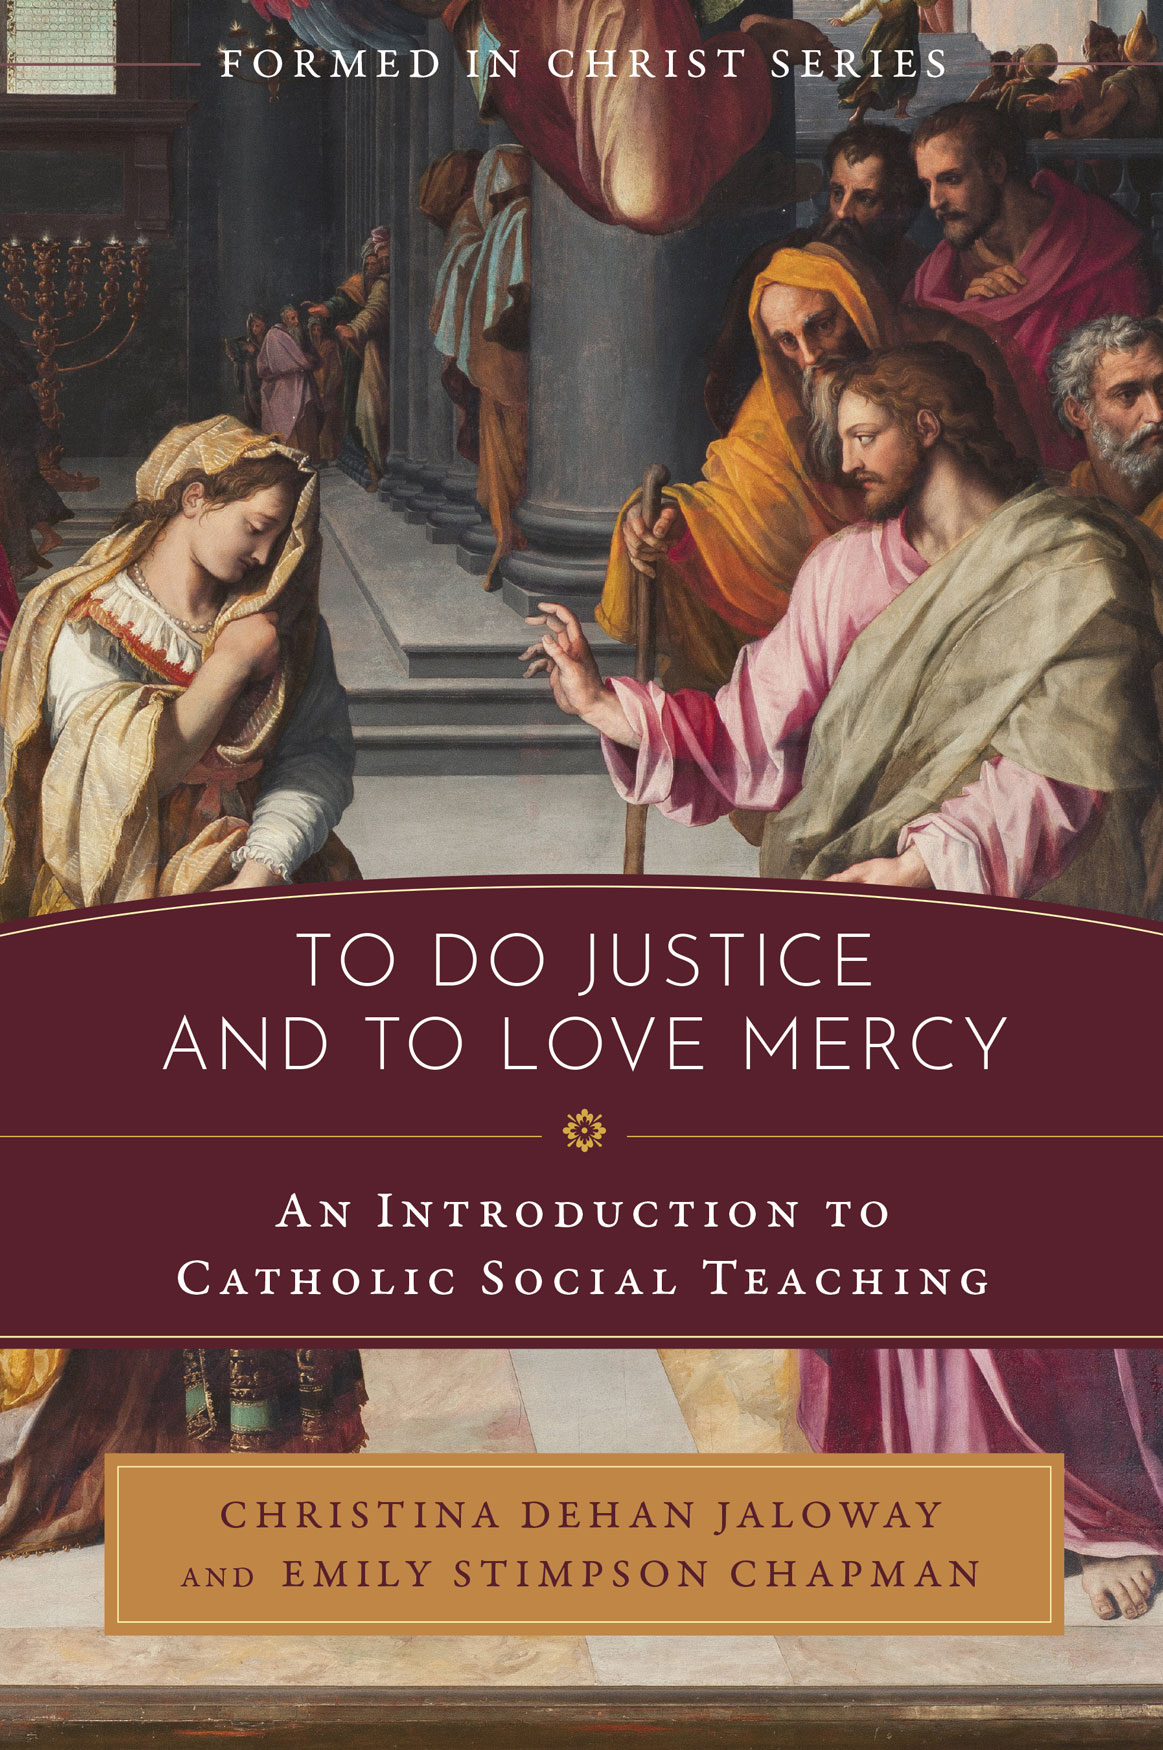 Formed in Christ To Do Justice and to Love Mercy / Christina Dehan Jaloway & Emily Stimpson Chapman